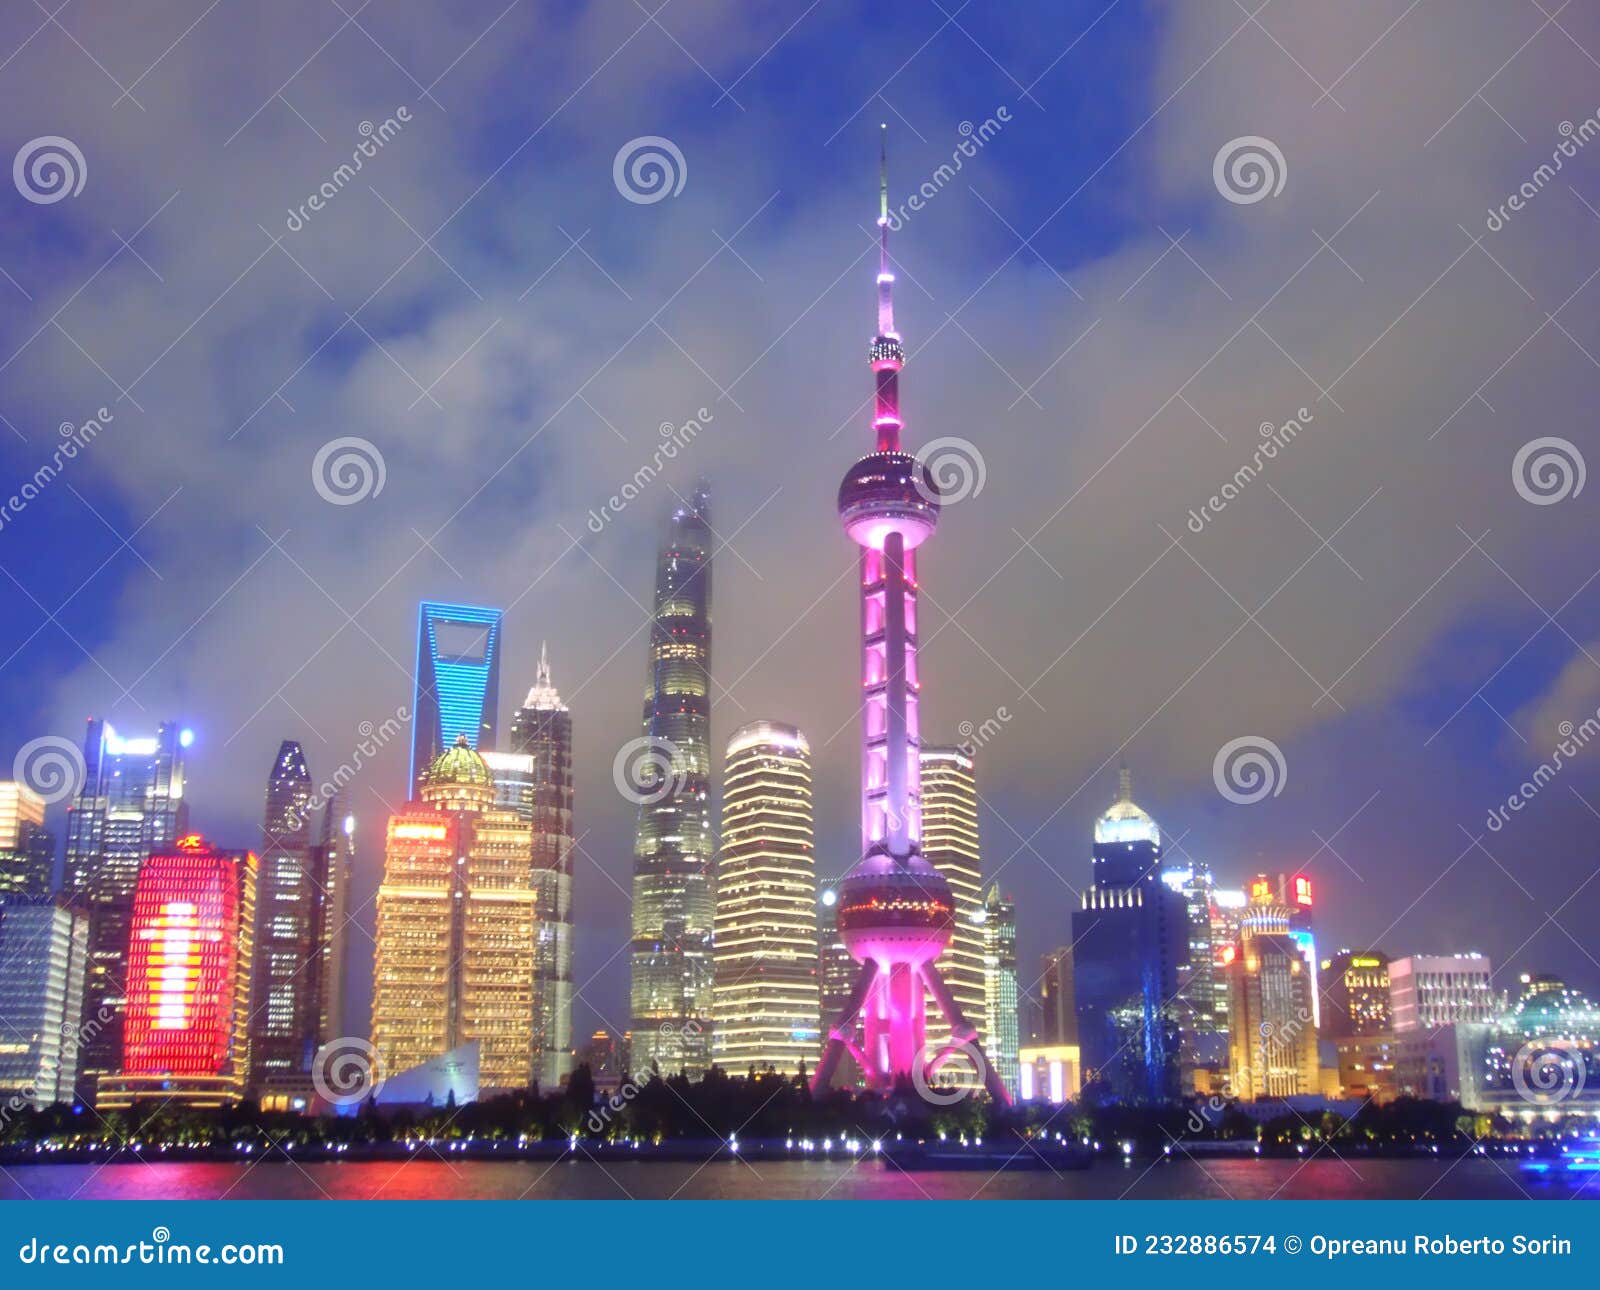 SHANGHAI SKYLINE AT NIGHT GLOSSY POSTER PICTURE PHOTO world financial china 2189 